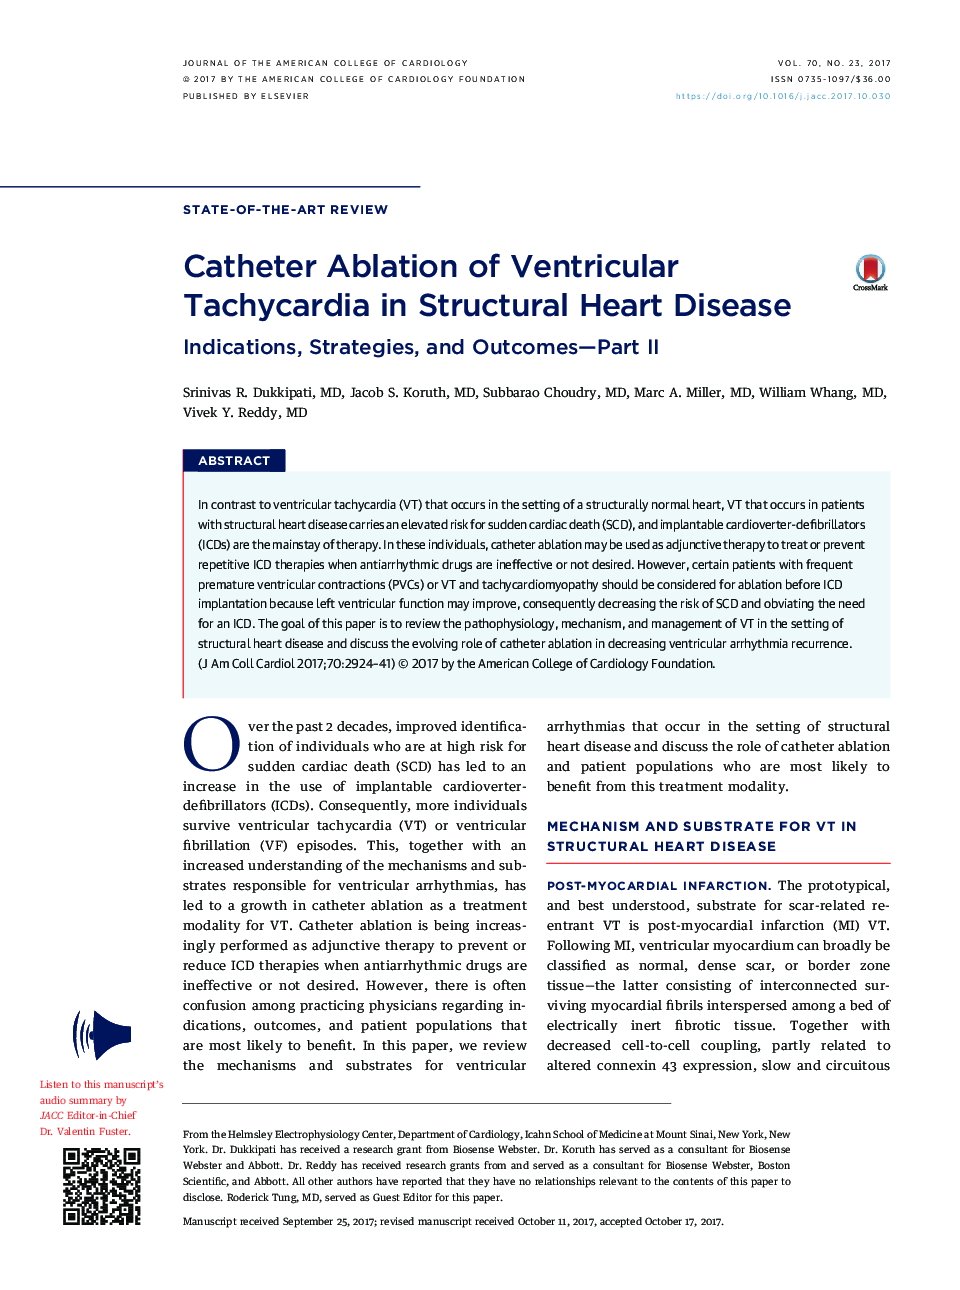 Catheter Ablation of Ventricular Tachycardia in Structural Heart Disease